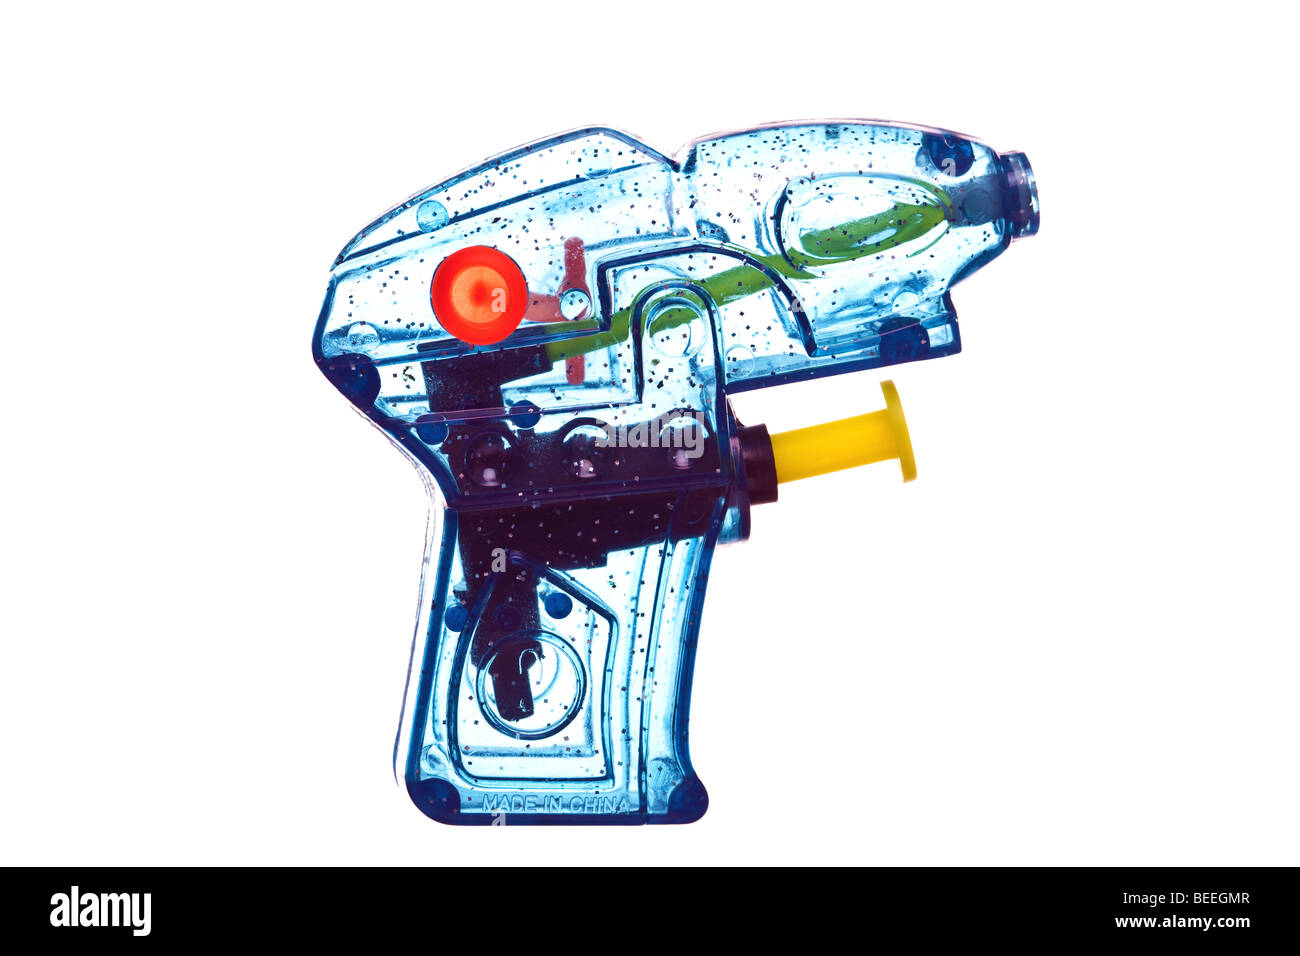 Blue transparent plastic water pistol isolated on a white background. Stock Photo